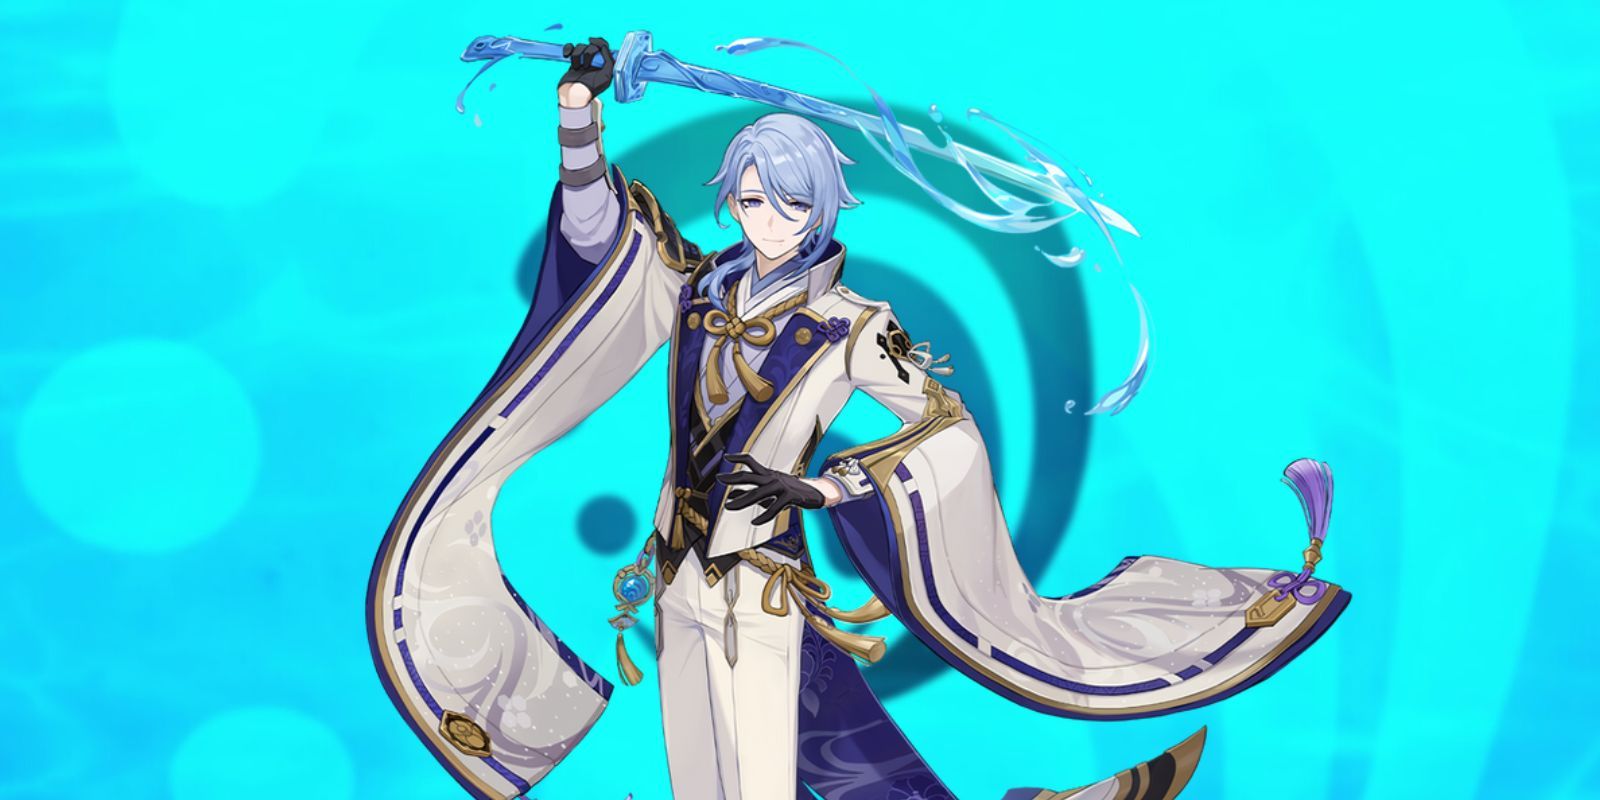 Genshin Impact's Kamisato Ayato holding a sword above his head with a blue, Hydro background.